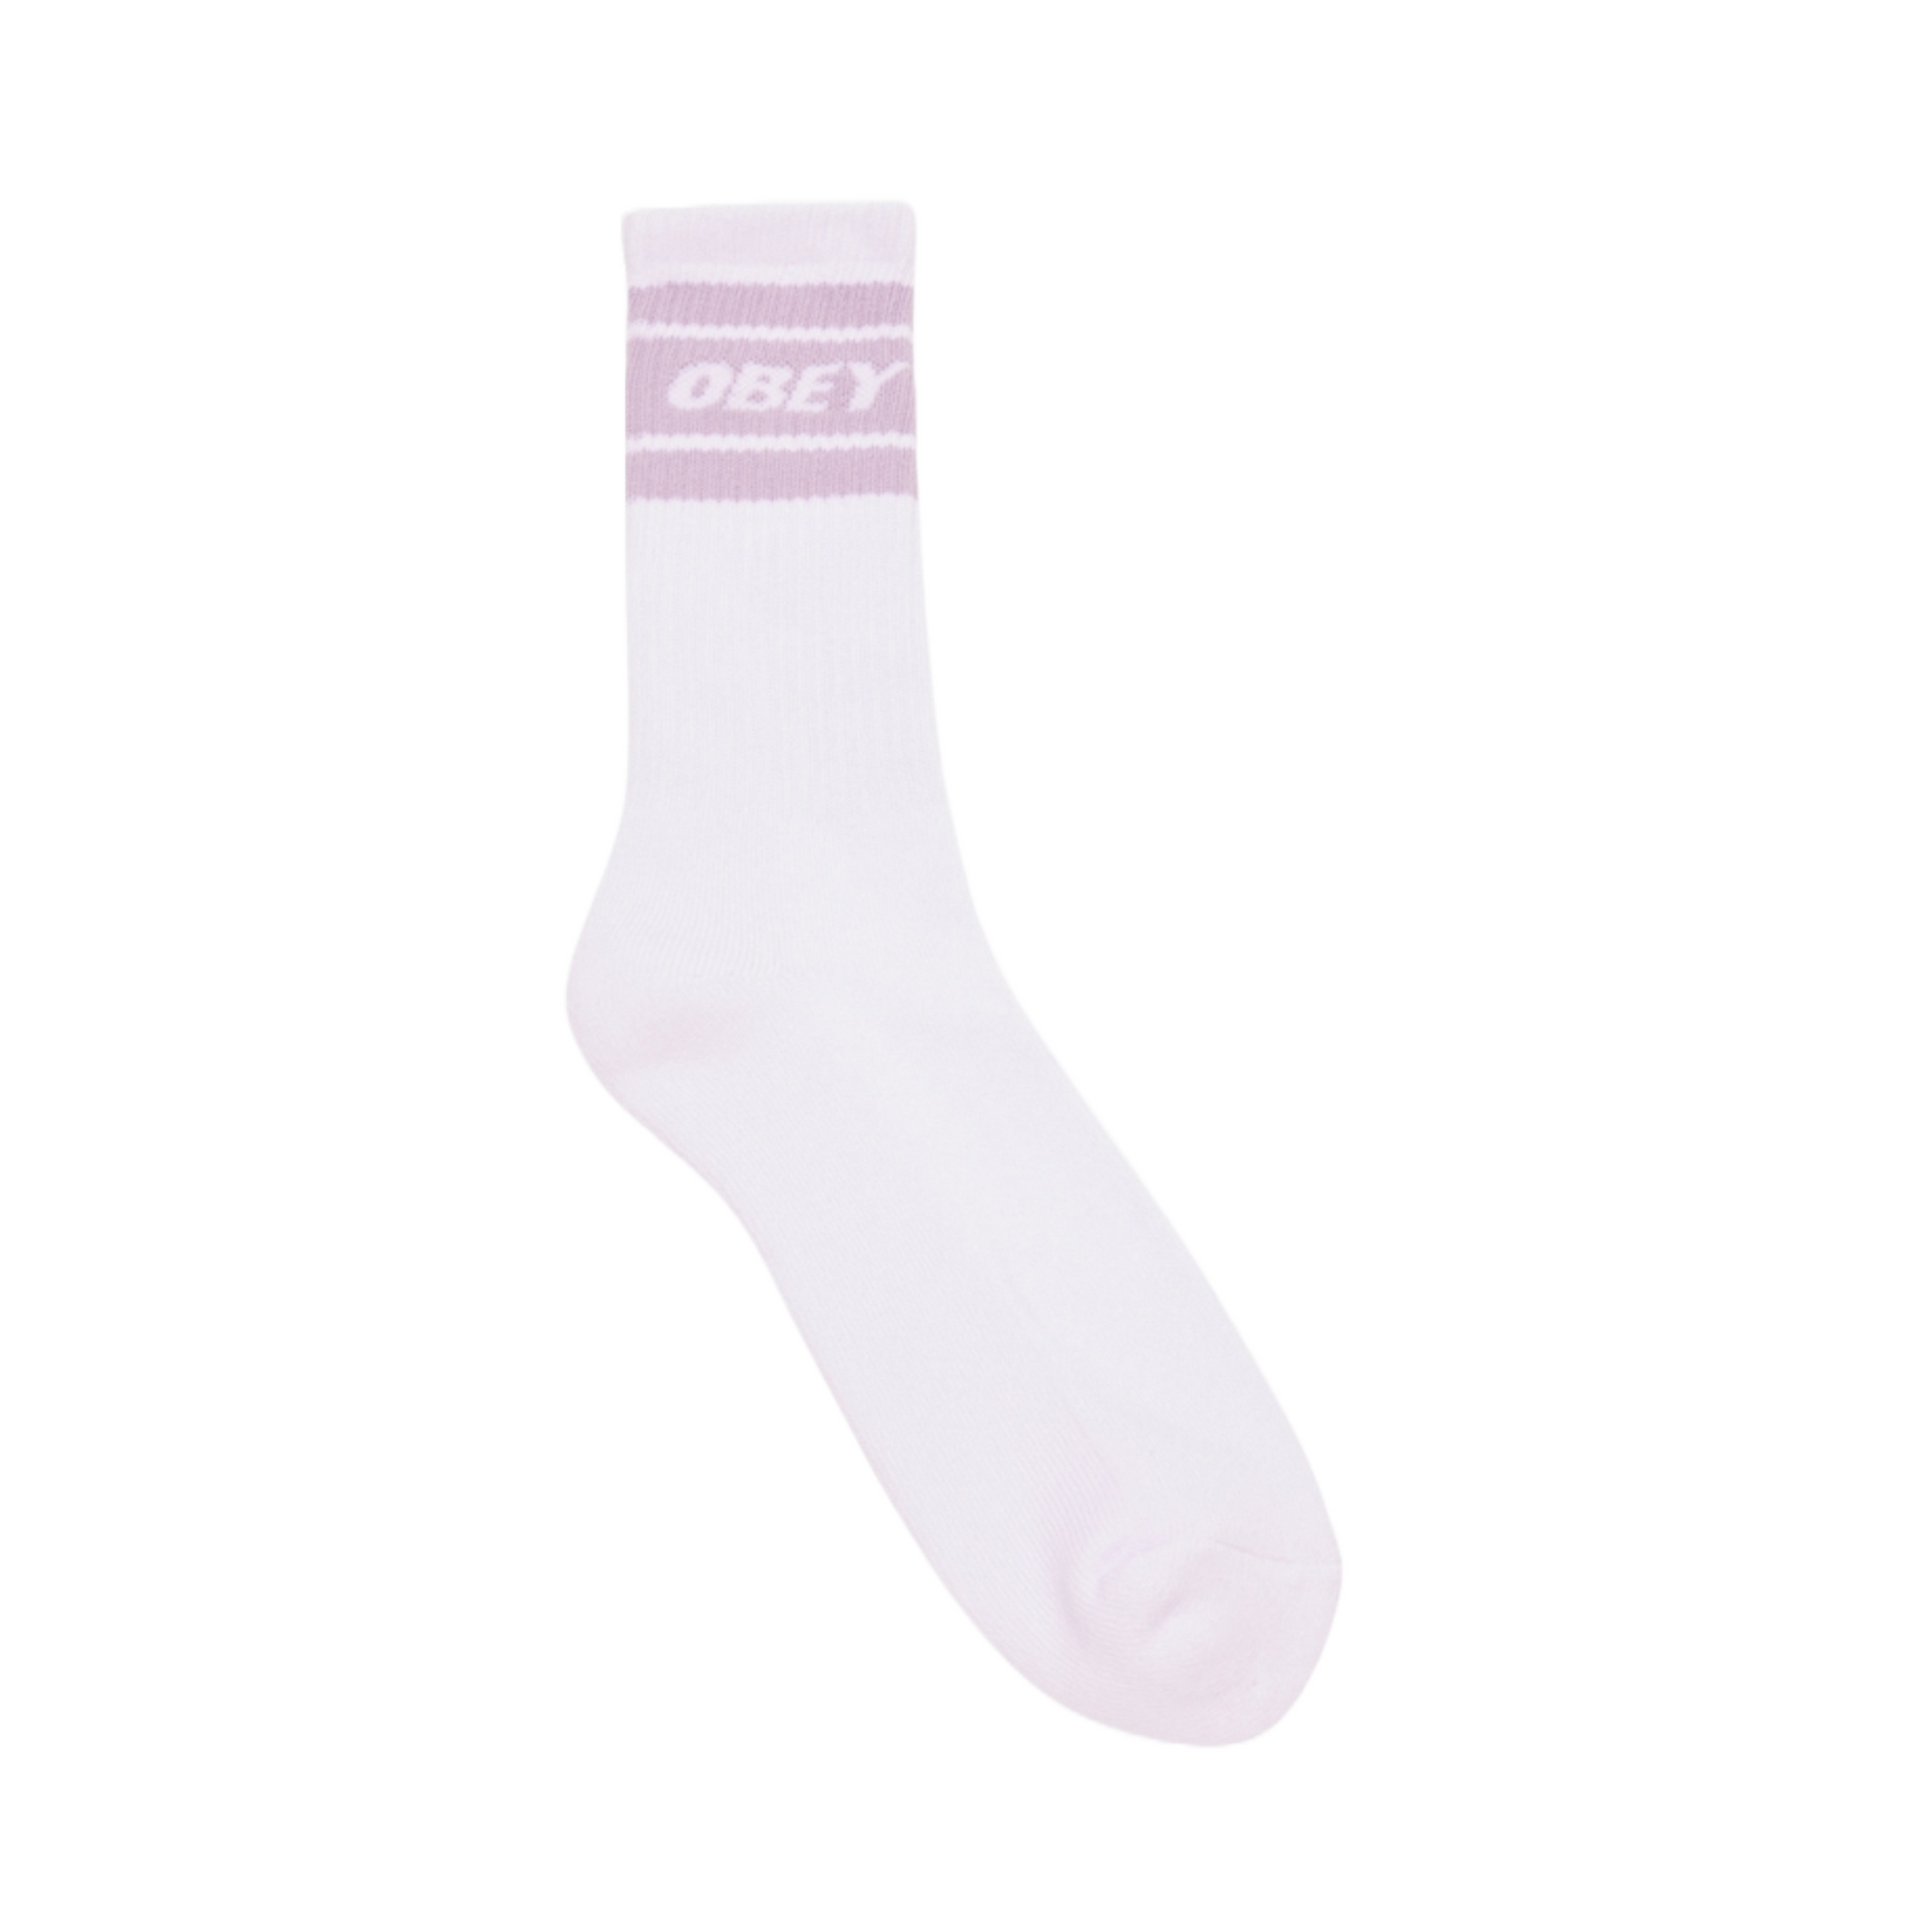 Obey Cooper Socks - Orchid Petal / White